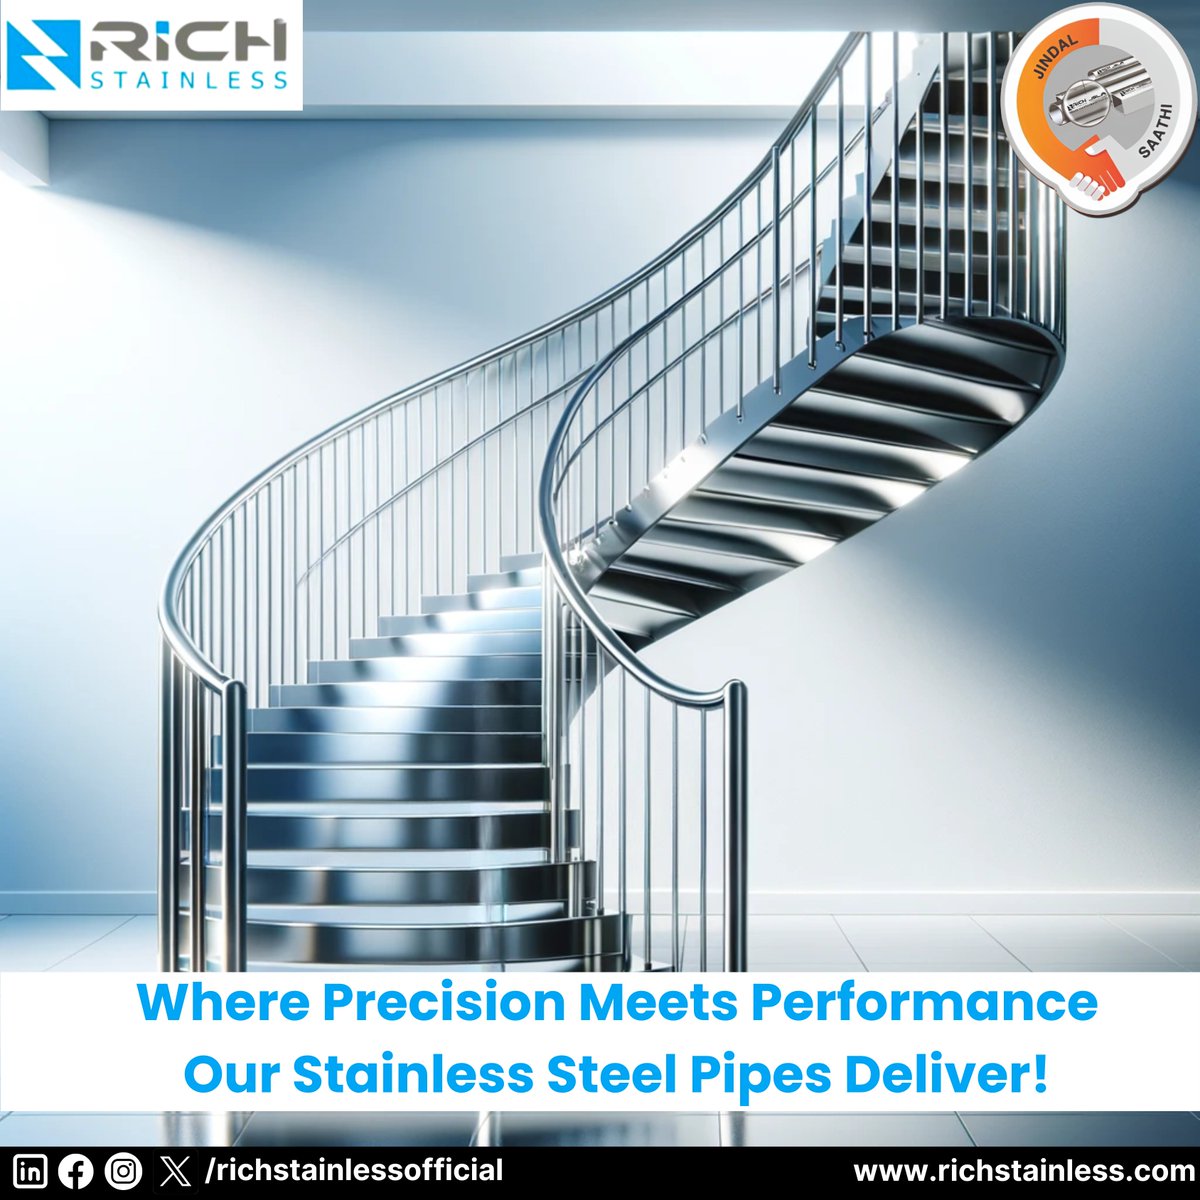 When integrity matters, count on our stainless steel pipes. Engineered for excellence. #stainlesssteel #metalfabrication #steelfabrication #stainlesssteelrailing #jindalsteel